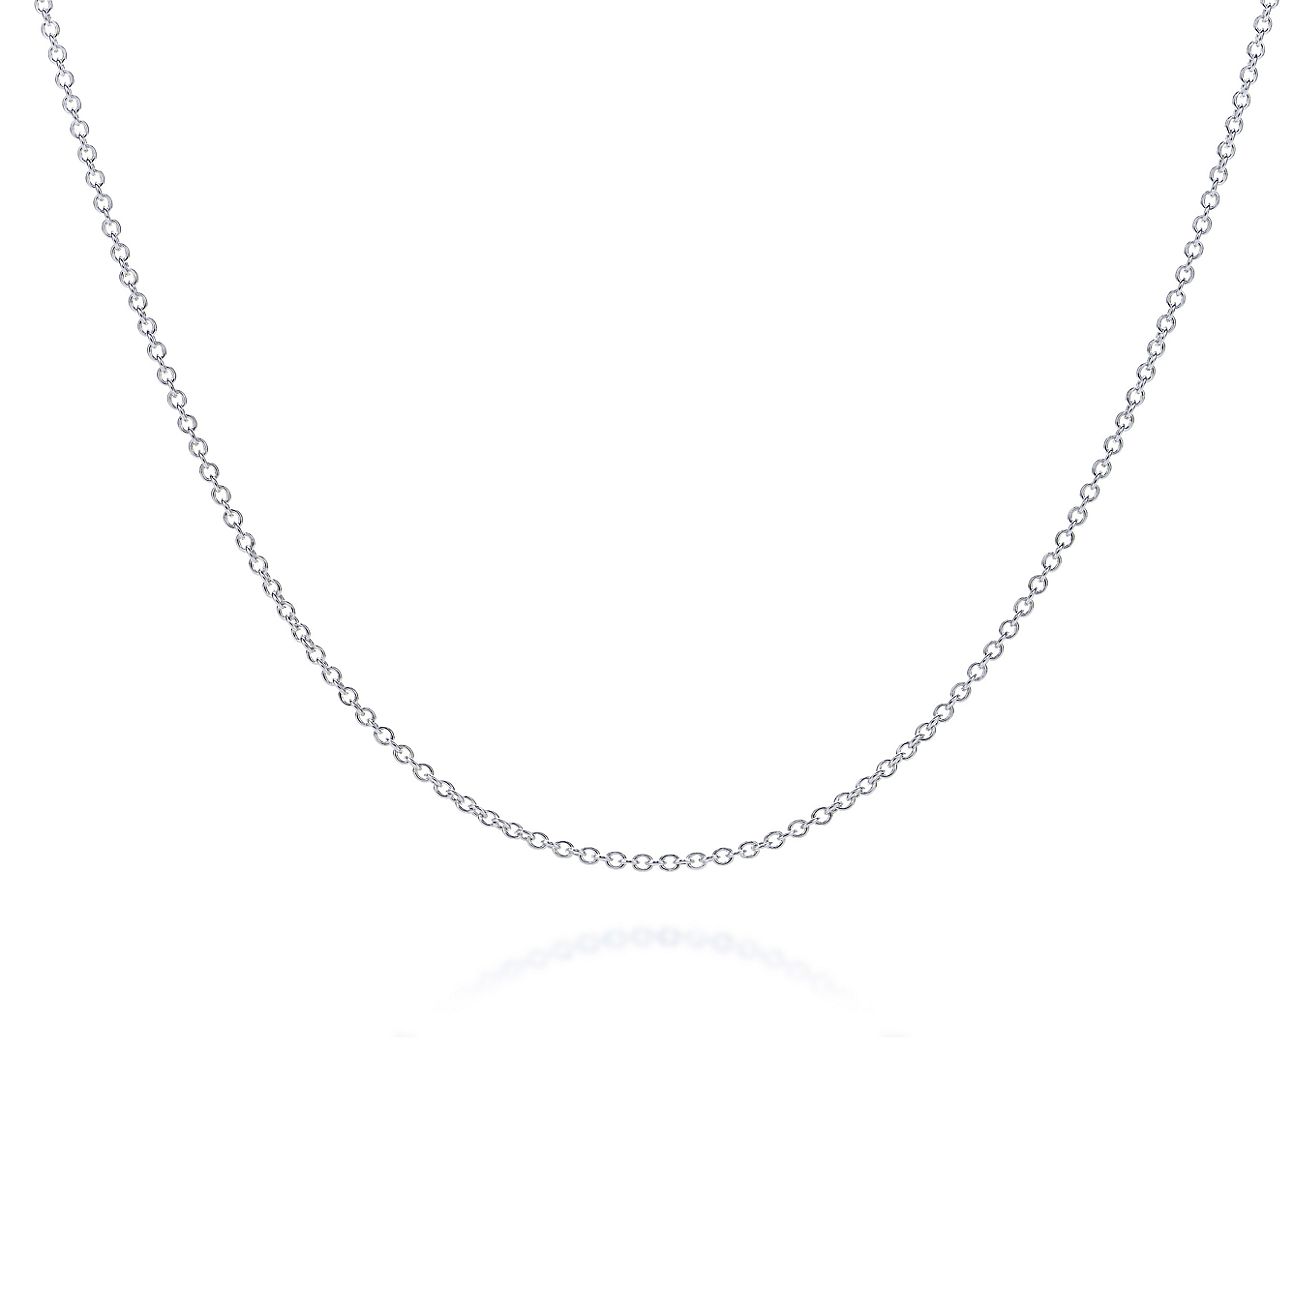 Shop Sterling Silver Chain Necklace 